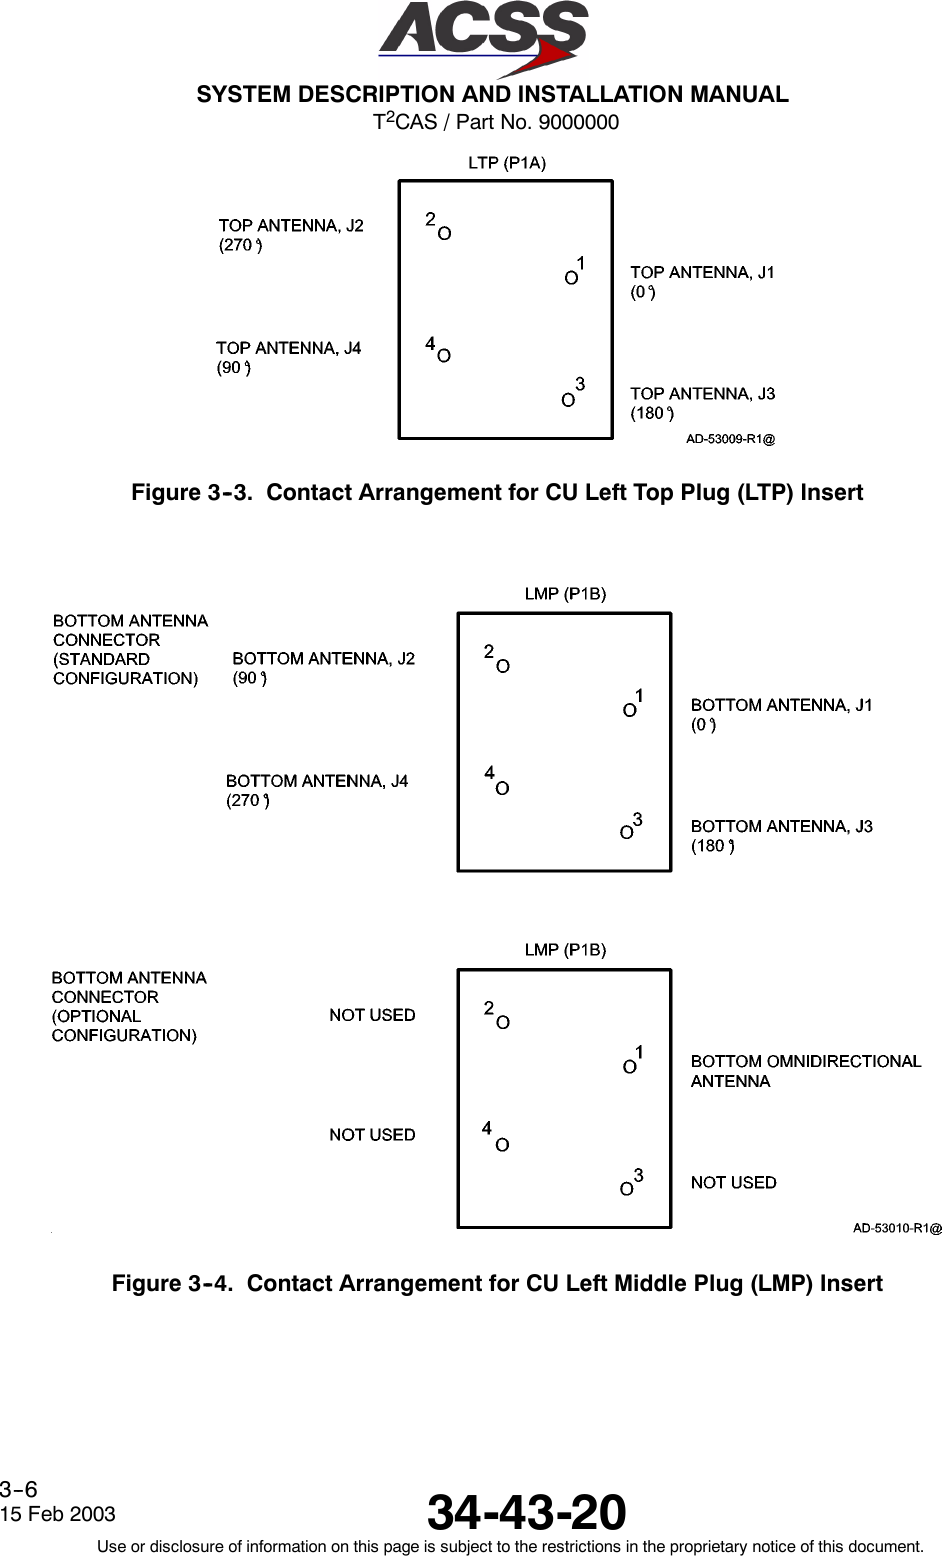 T2CAS / Part No. 9000000SYSTEM DESCRIPTION AND INSTALLATION MANUAL34-43-2015 Feb 2003Use or disclosure of information on this page is subject to the restrictions in the proprietary notice of this document.3--6Figure 3--3. Contact Arrangement for CU Left Top Plug (LTP) InsertFigure 3--4. Contact Arrangement for CU Left Middle Plug (LMP) Insert